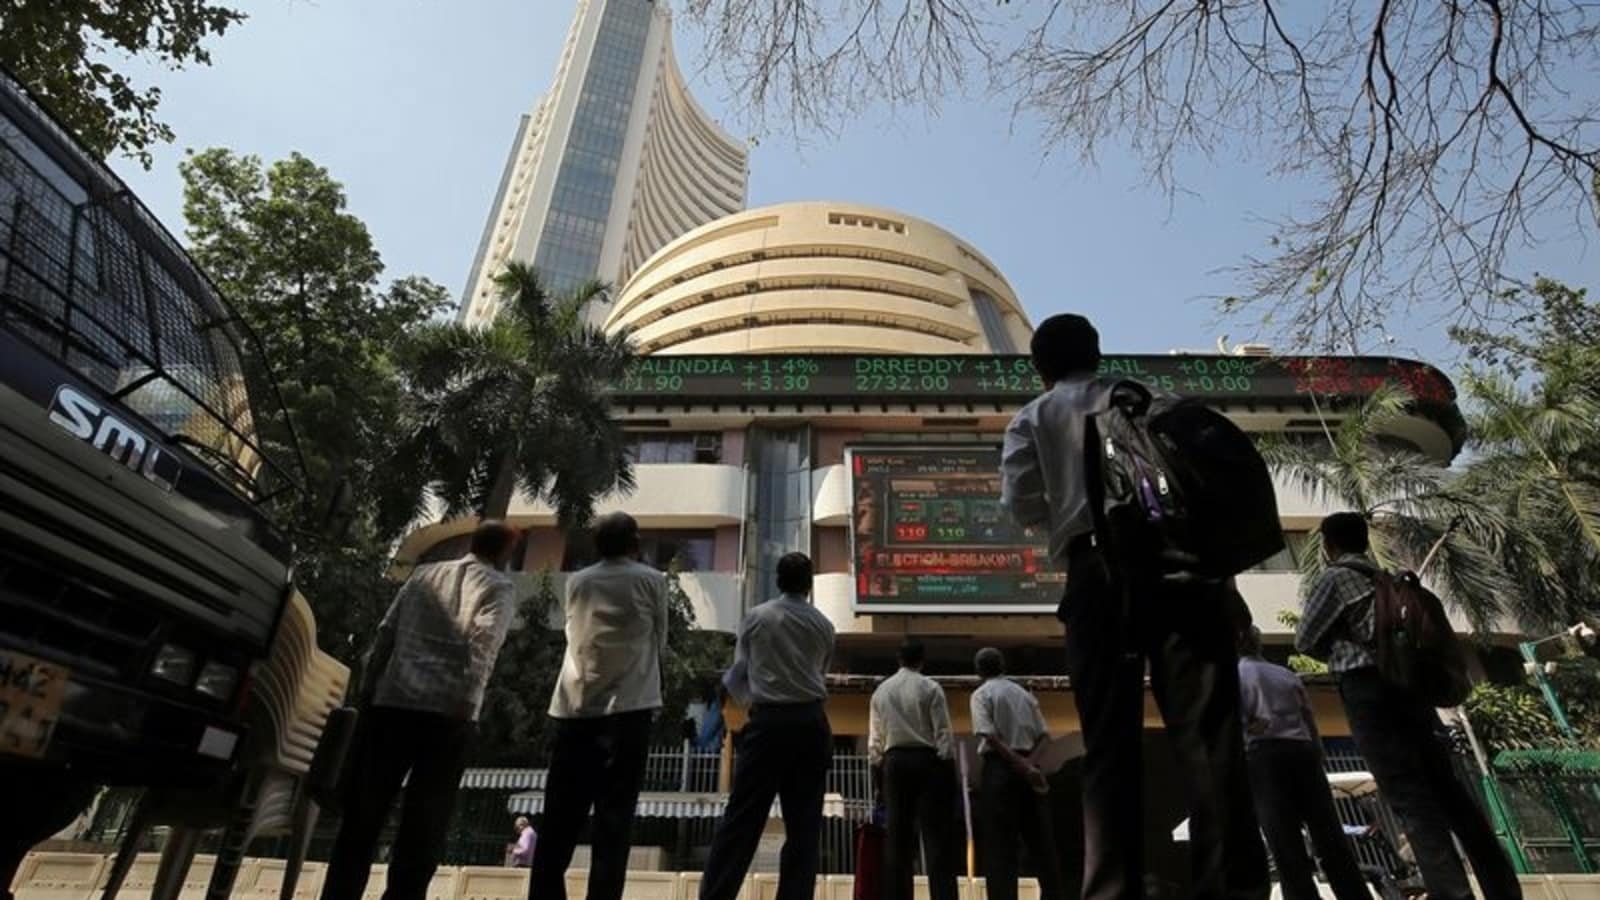 Sensex sheds 85 points to end day at 56,976; Nifty down by 33 points